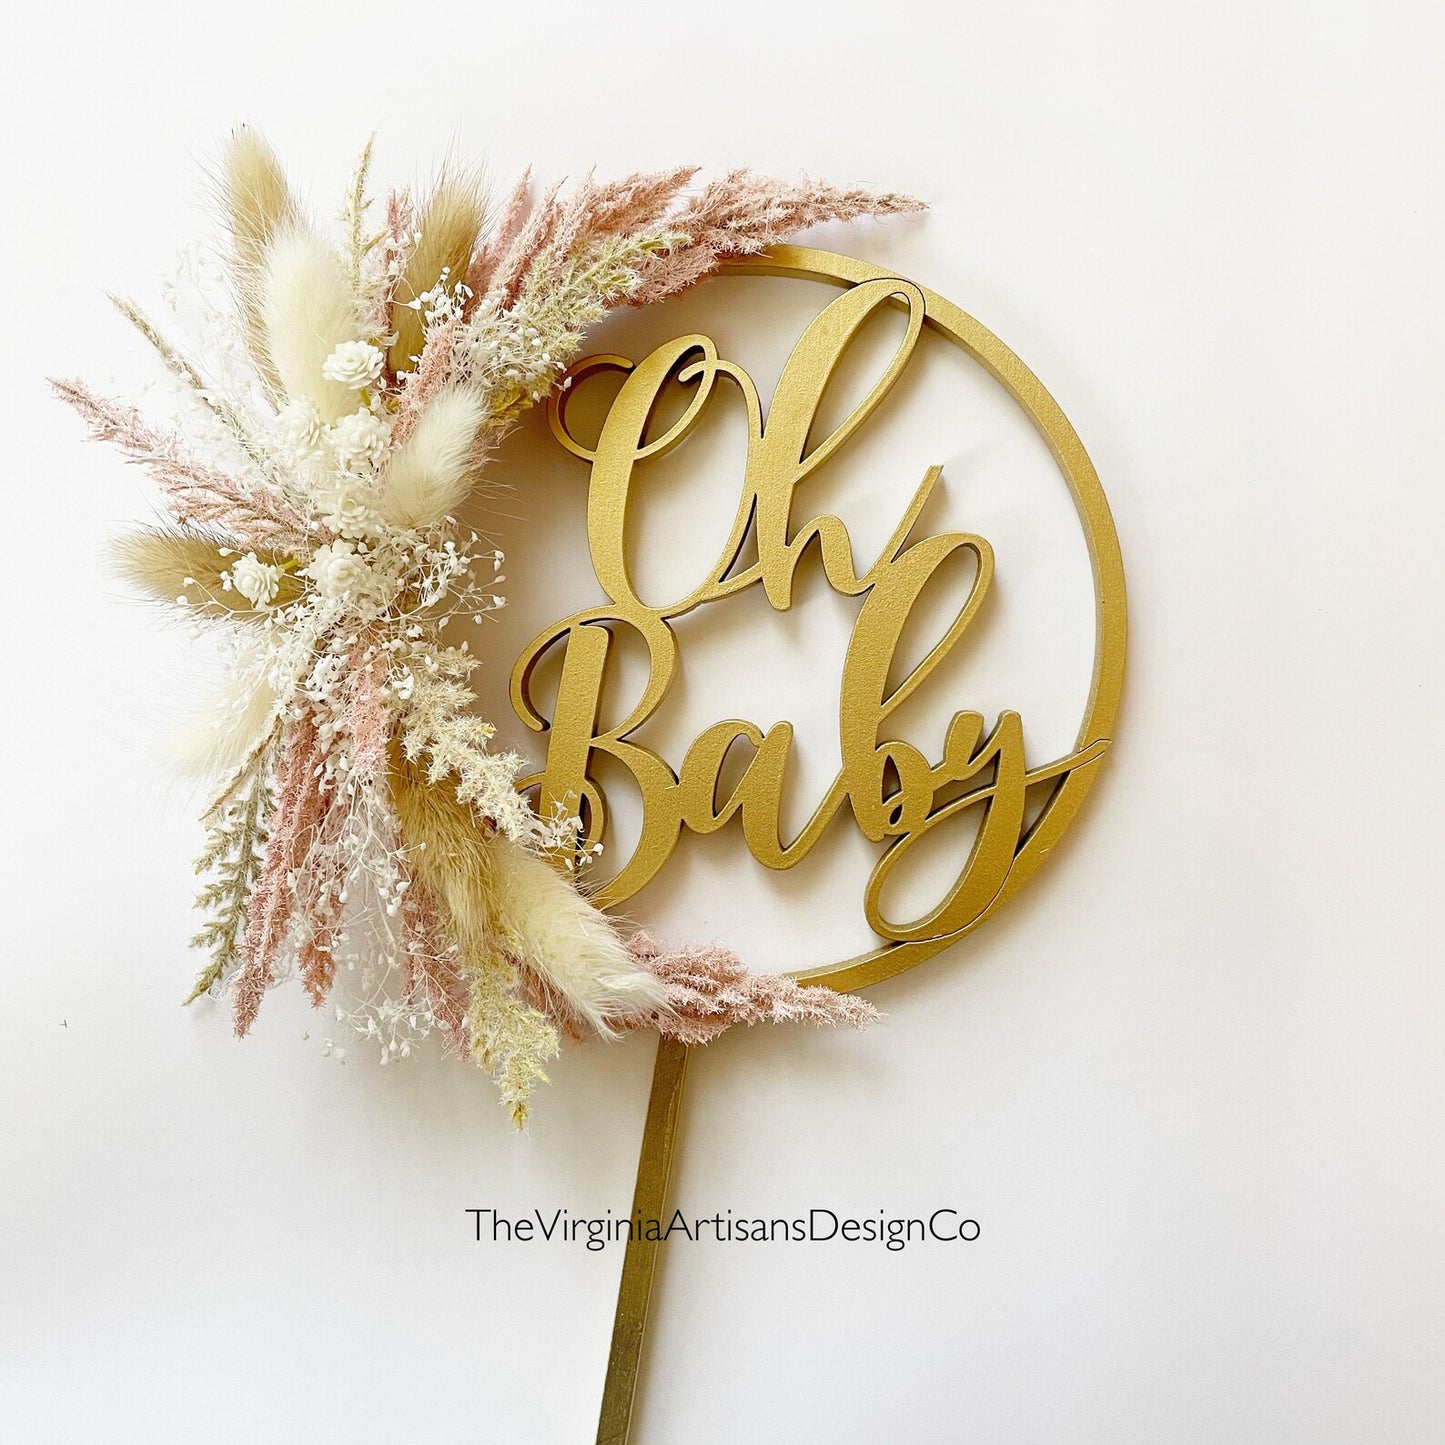 Oh Baby - Hoop Cake Topper with Blush, Cream and Blue Dried Flower Options